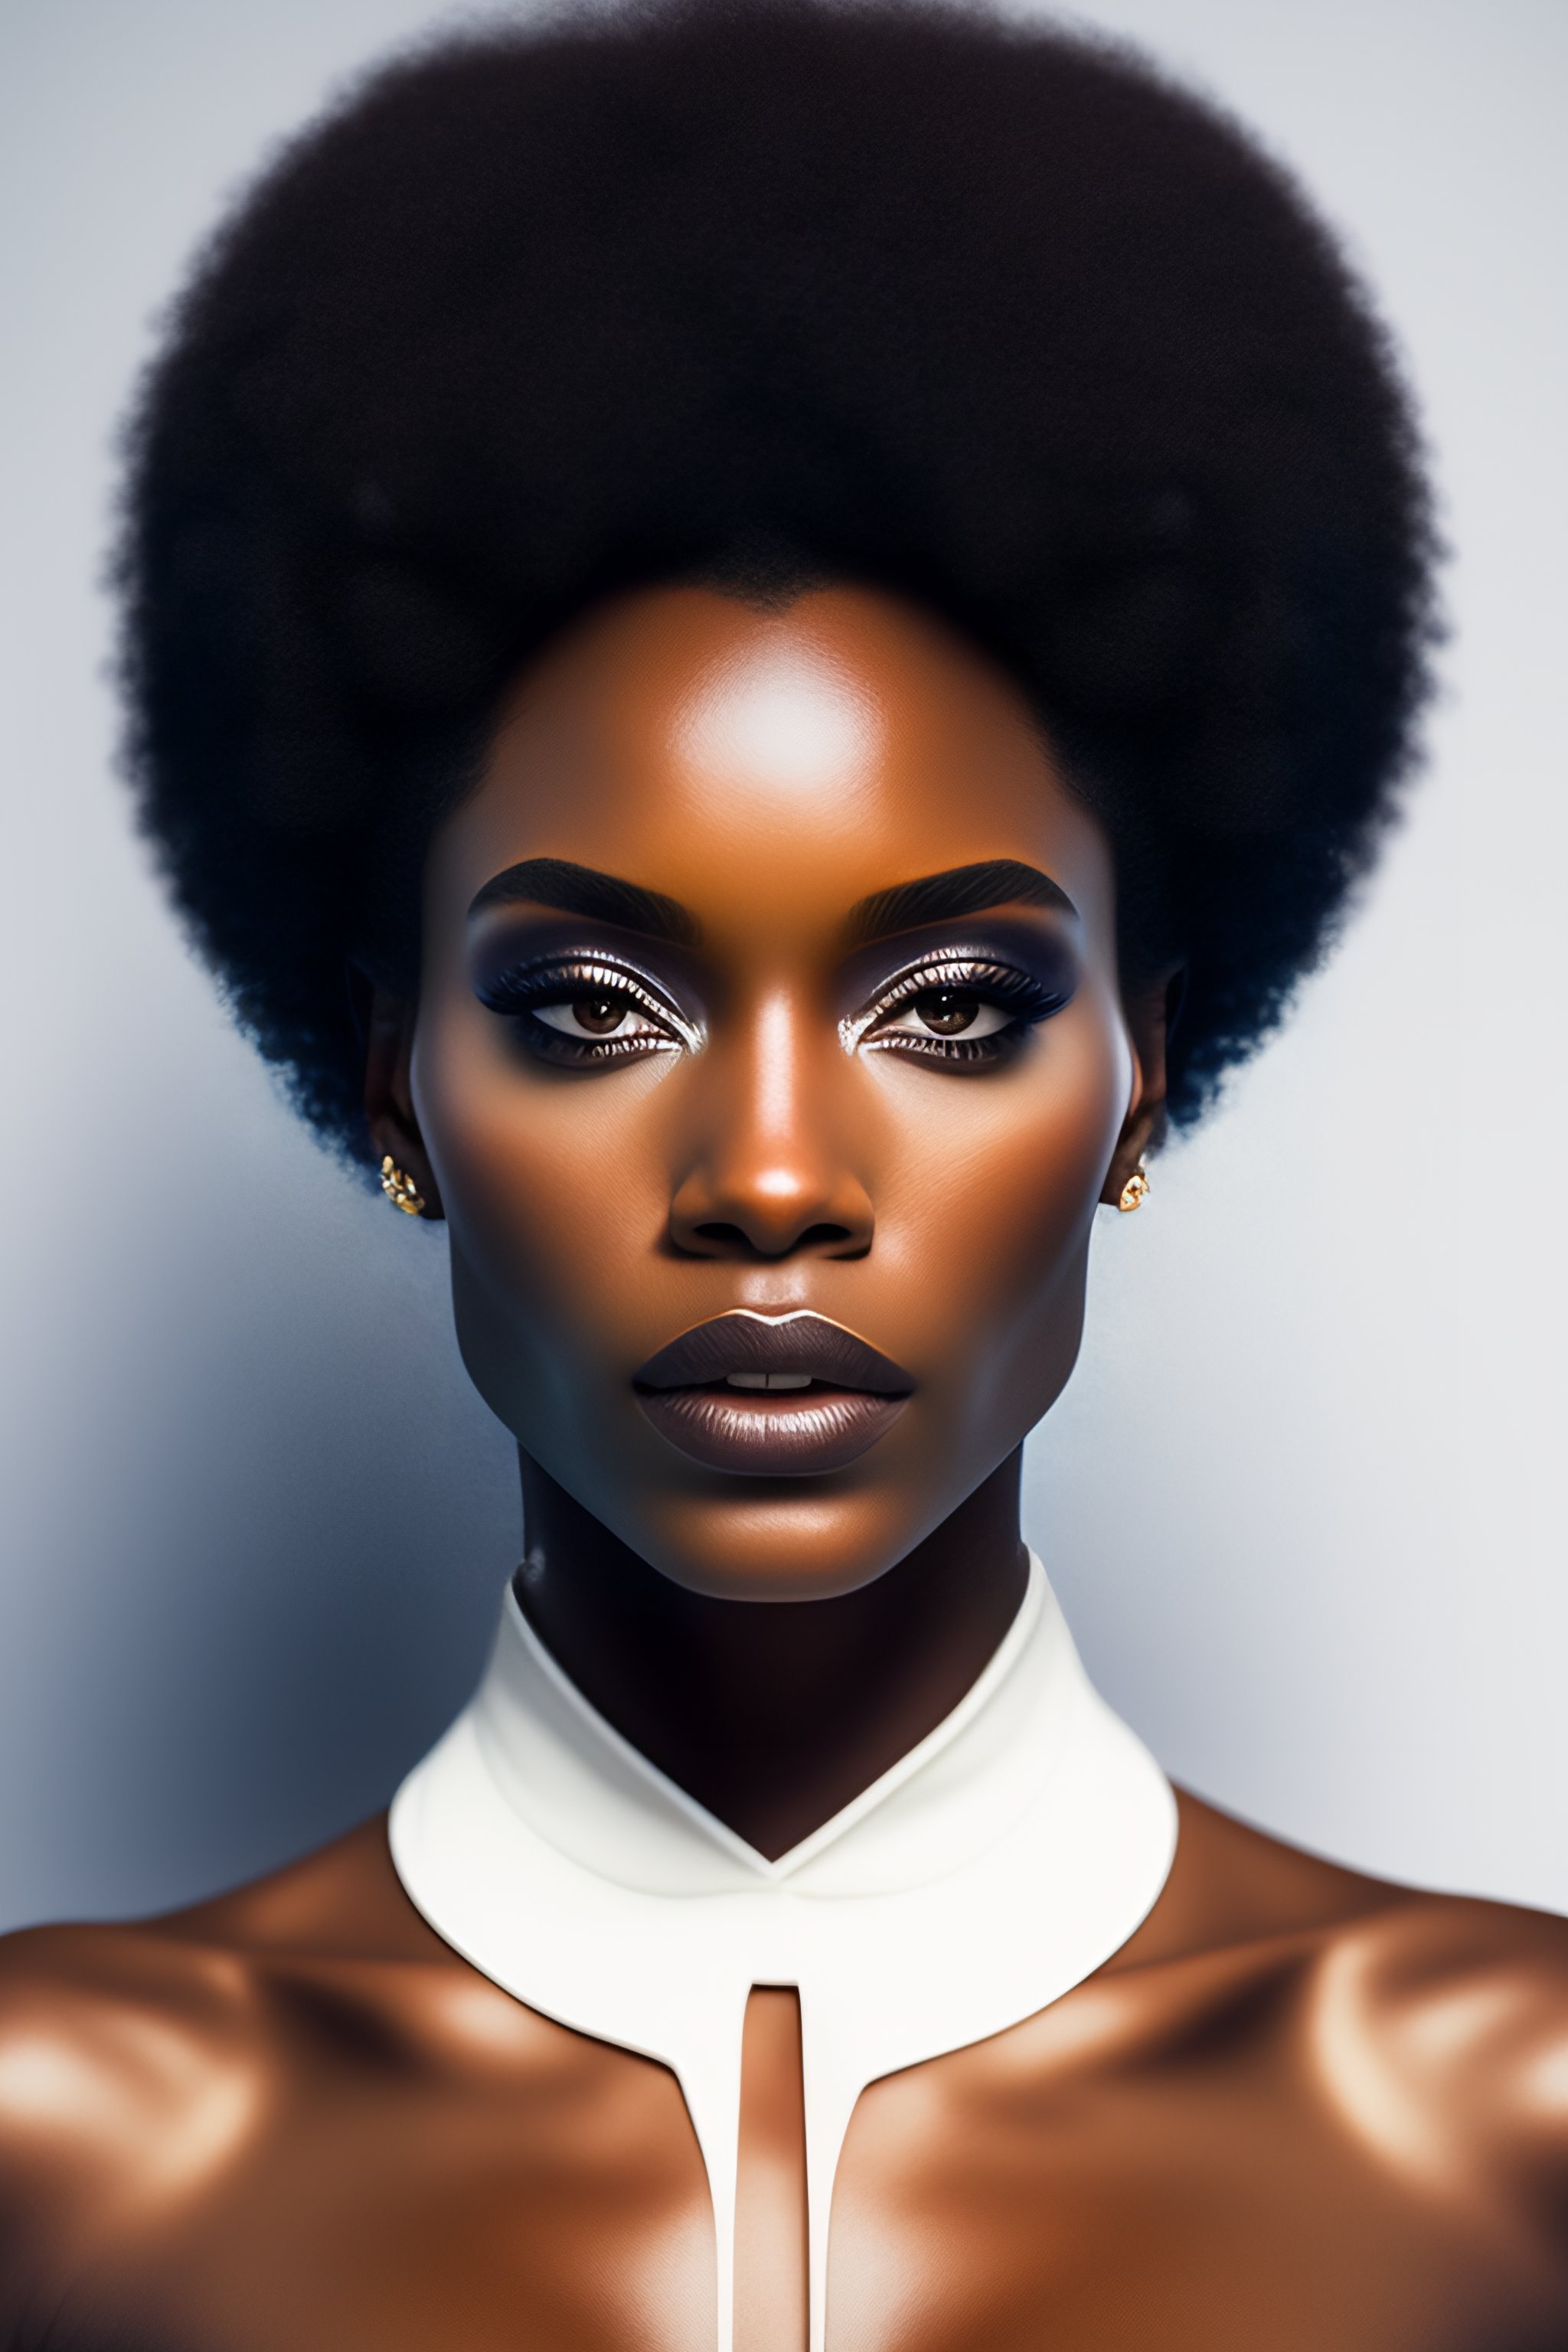 Lexica A Beautiful And Mysterious Melanated Woman With An Afro No Blur Close Up Details 8880